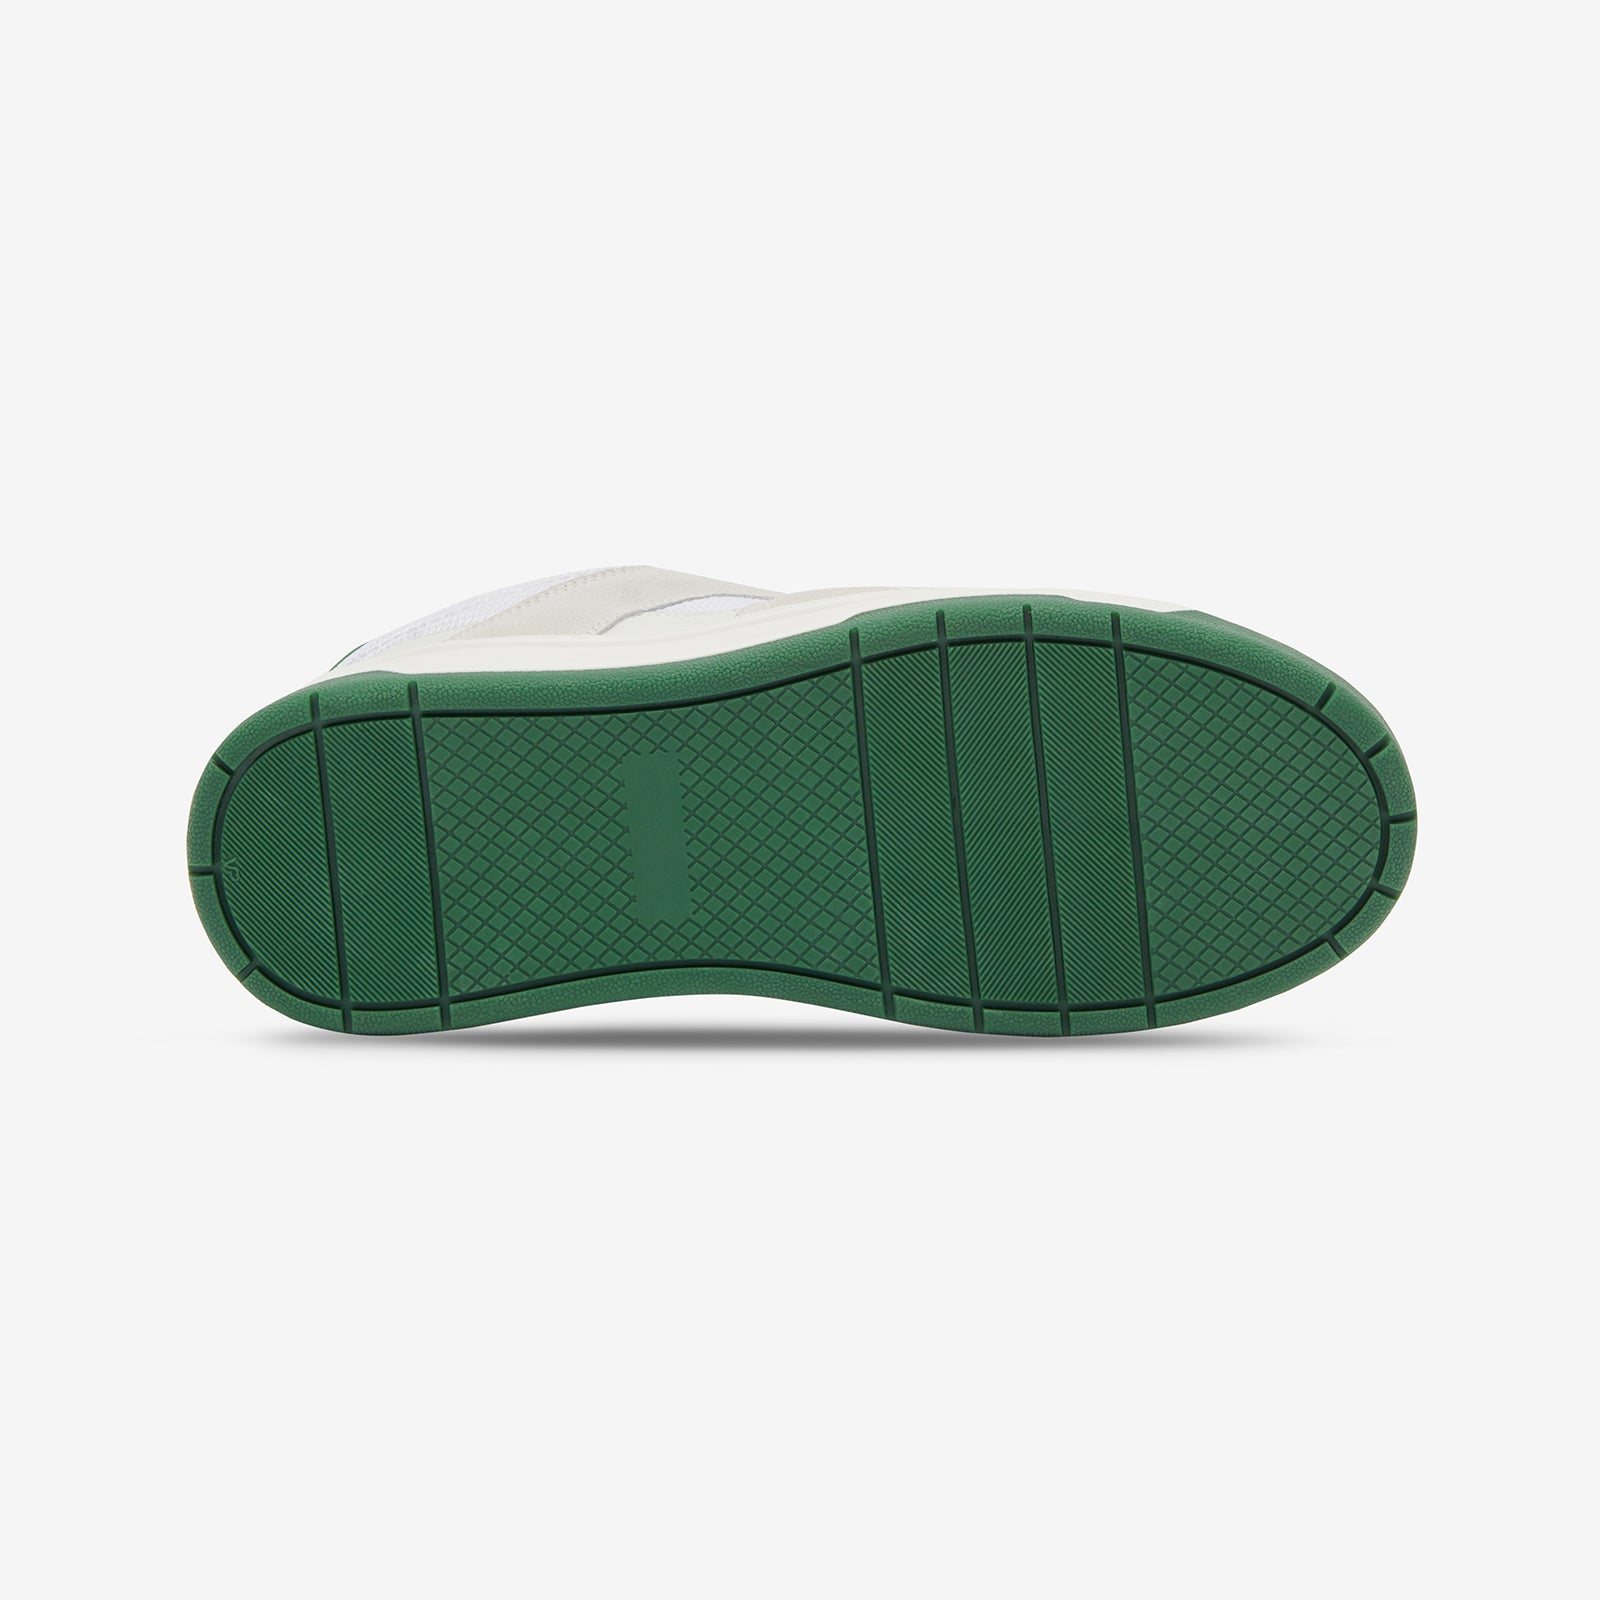 The Cooper Low Skate - Blanco Green